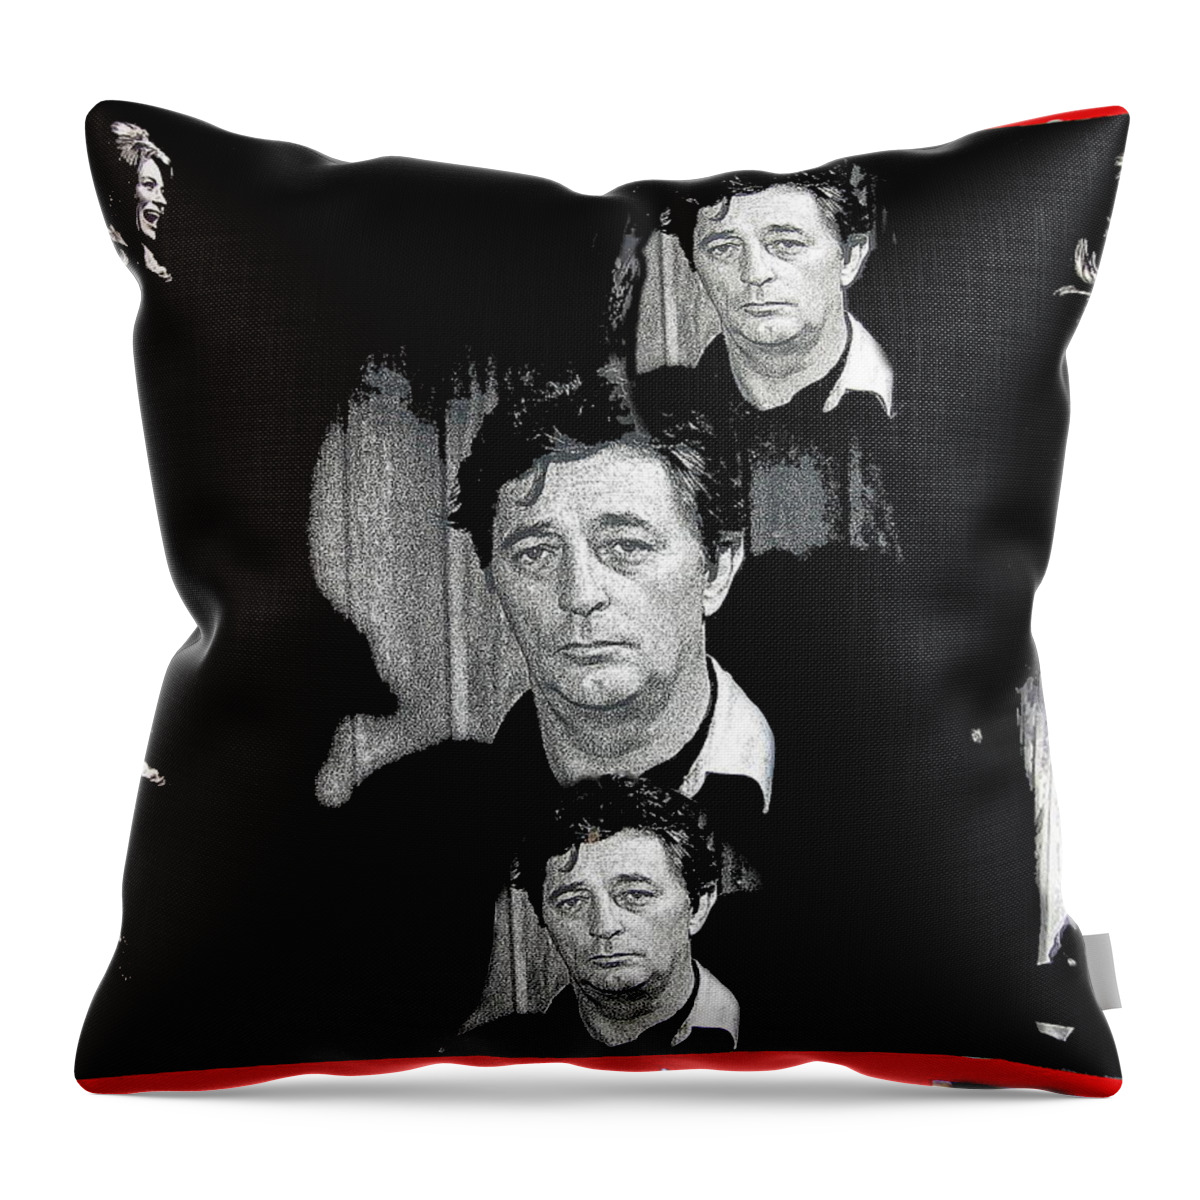 Angie Dickinson Robert Mitchum Collage Young Billy Young Set Old Tucson Arizona 1968 Color Added Throw Pillow featuring the photograph Angie Dickinson Robert Mitchum collage Young Billy Young set Old Tucson Arizona 1968-2013 by David Lee Guss